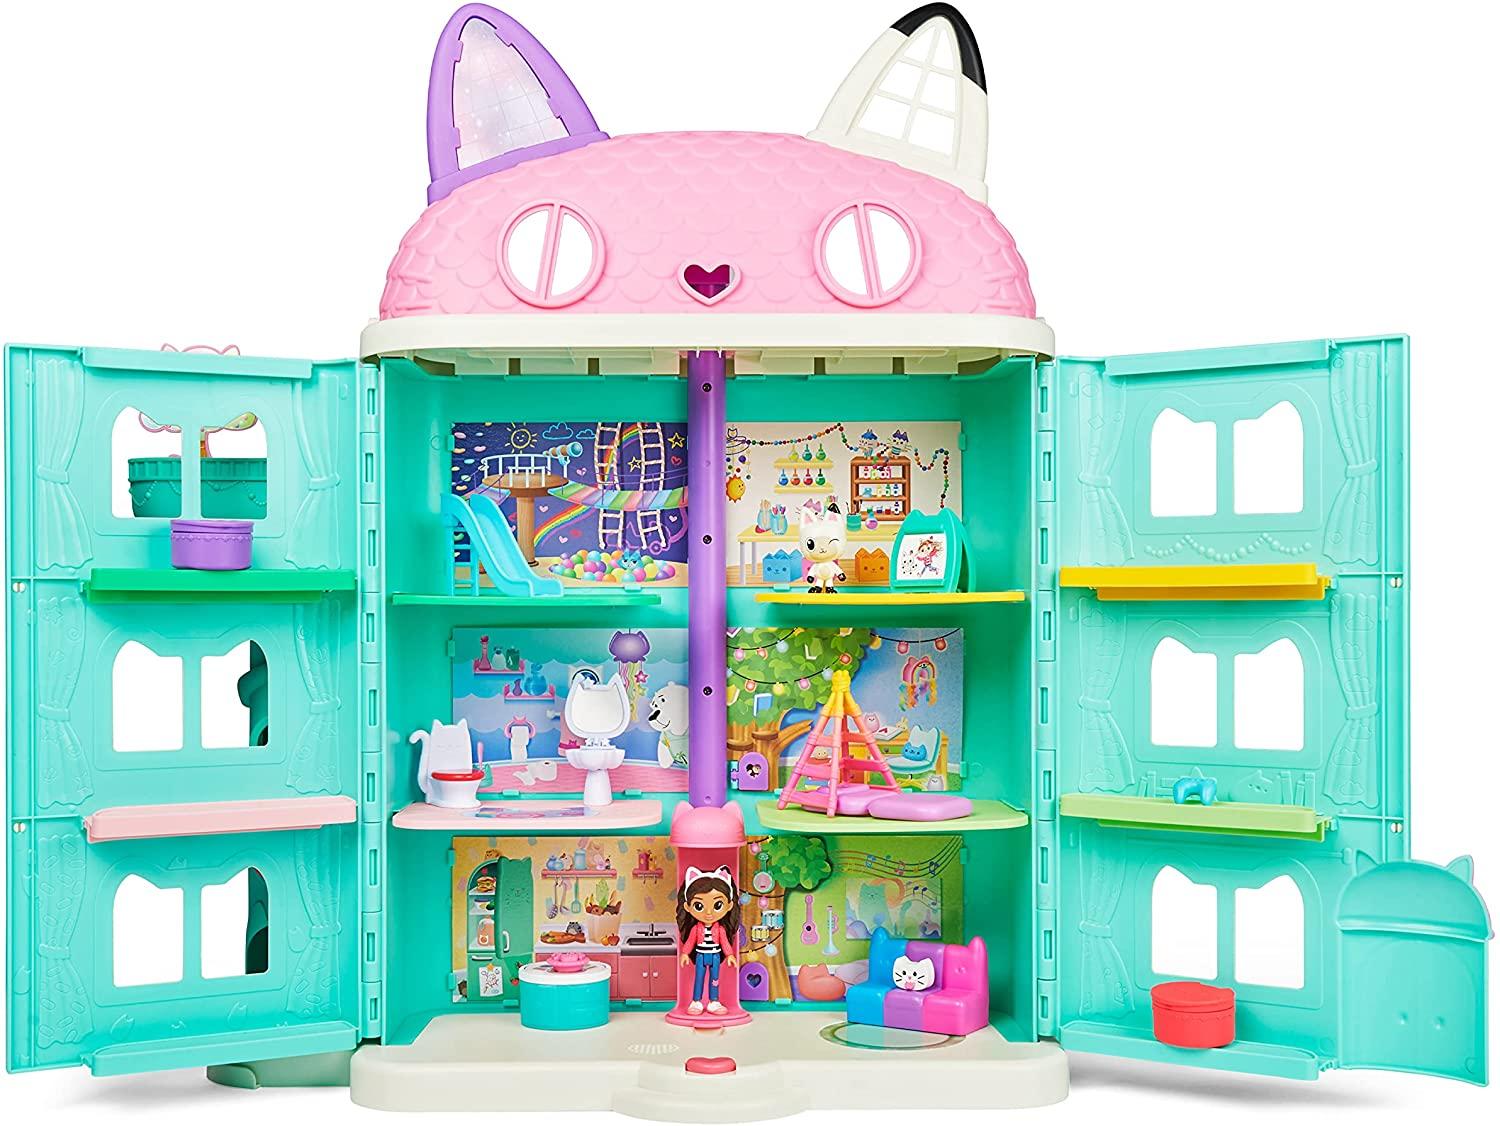 Gabby's Dollhouse, Purrfect Dollhouse with 15 Pieces Including Toy Figures, Furniture, Accessories and Sounds